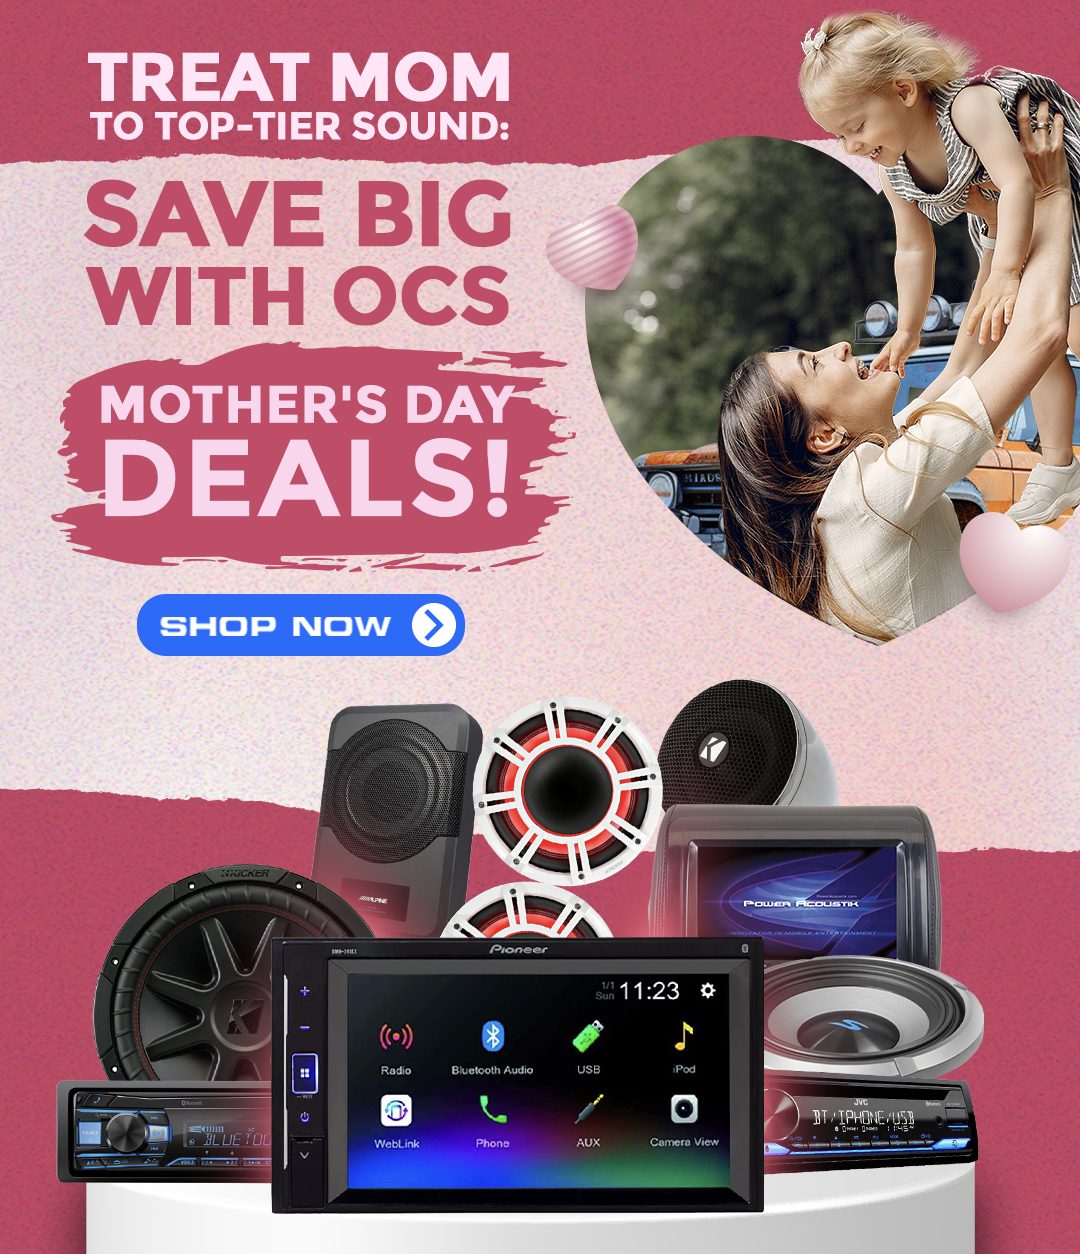 Treat Mom To Top-Tier Sound: Save Big With OCS Mother's Day Deals!